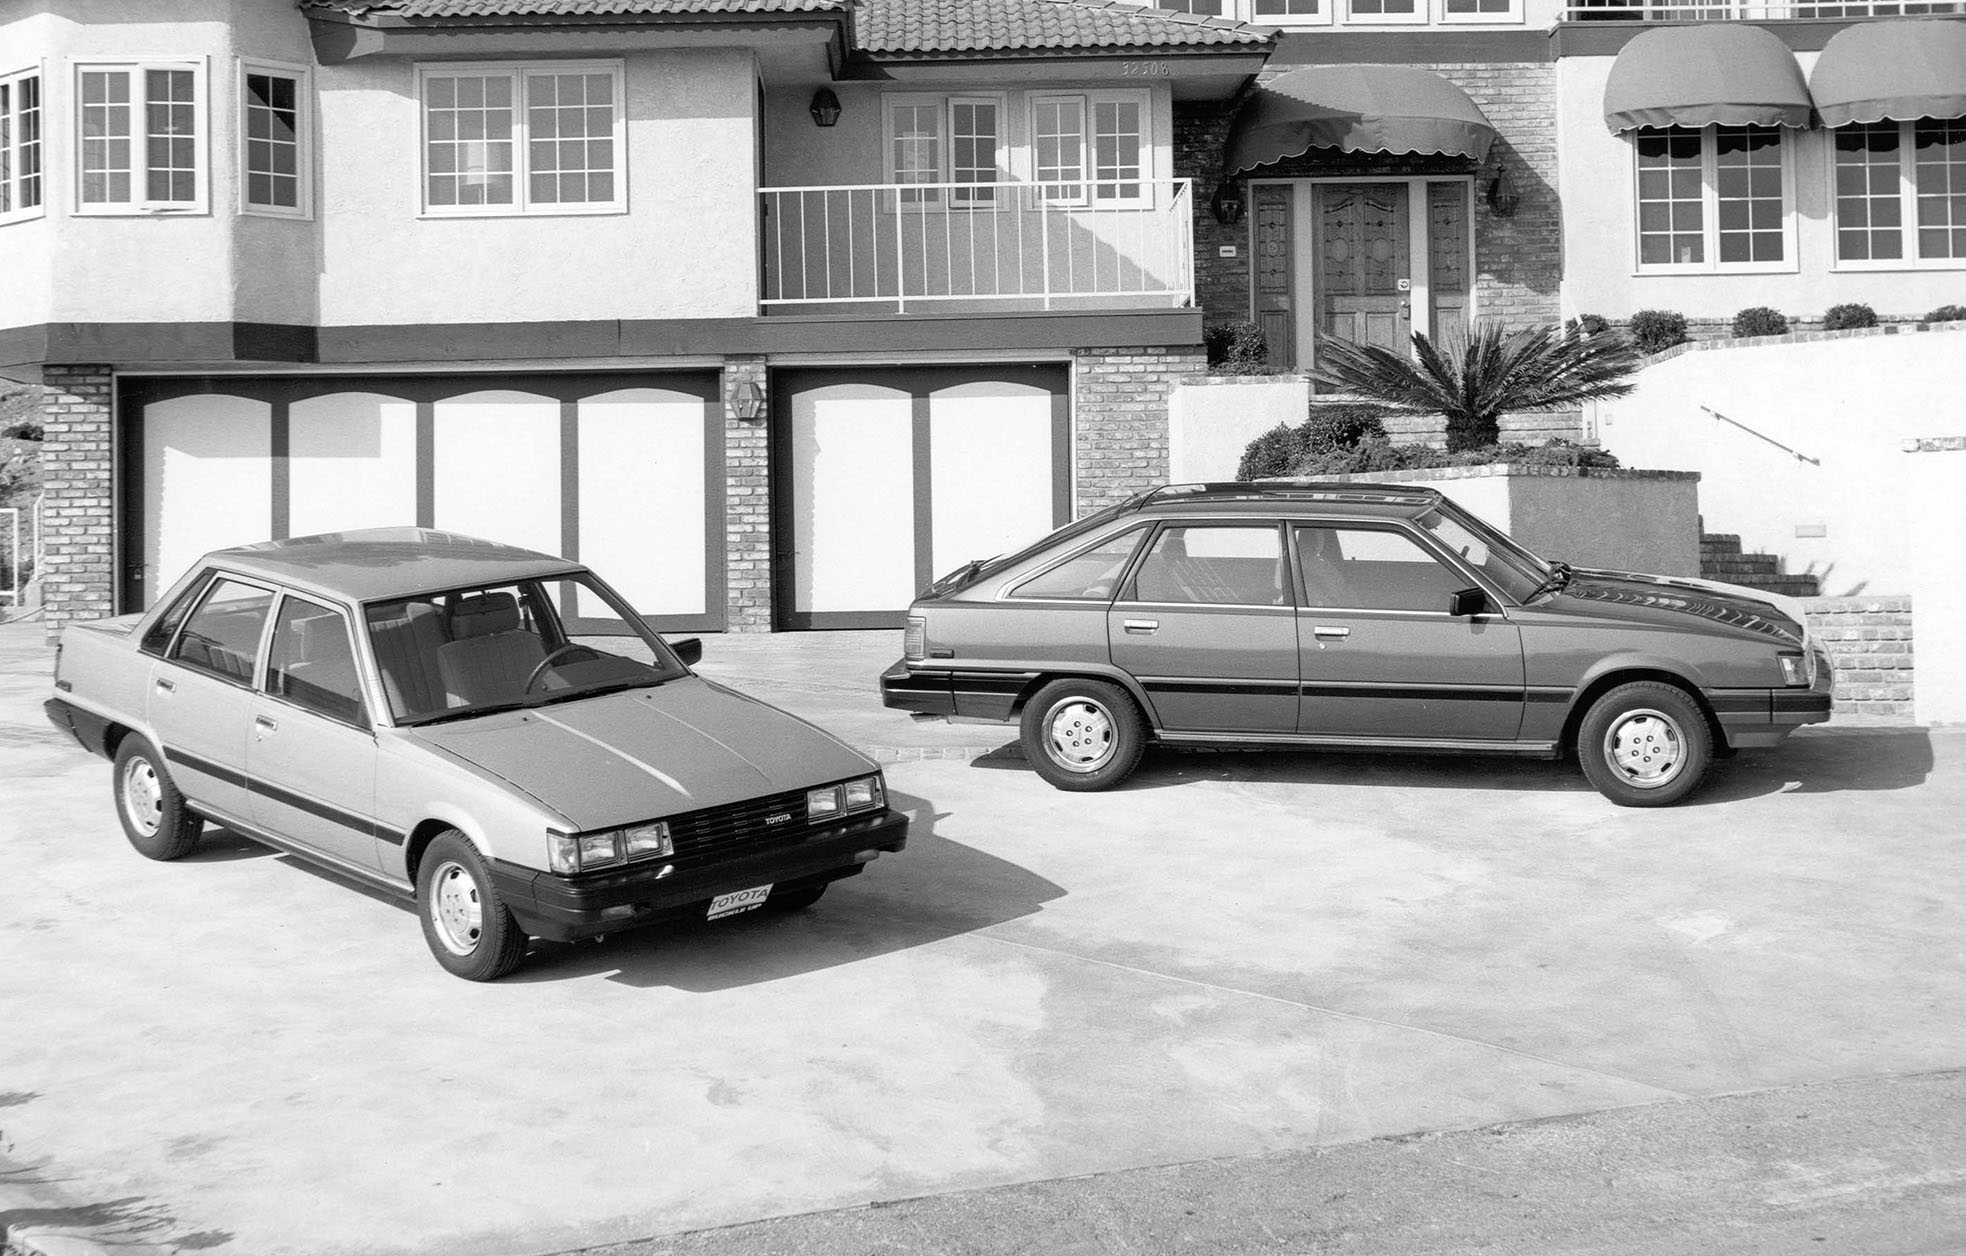 A 1980s Toyota Camry sedan and hatchback parked in front of a house.